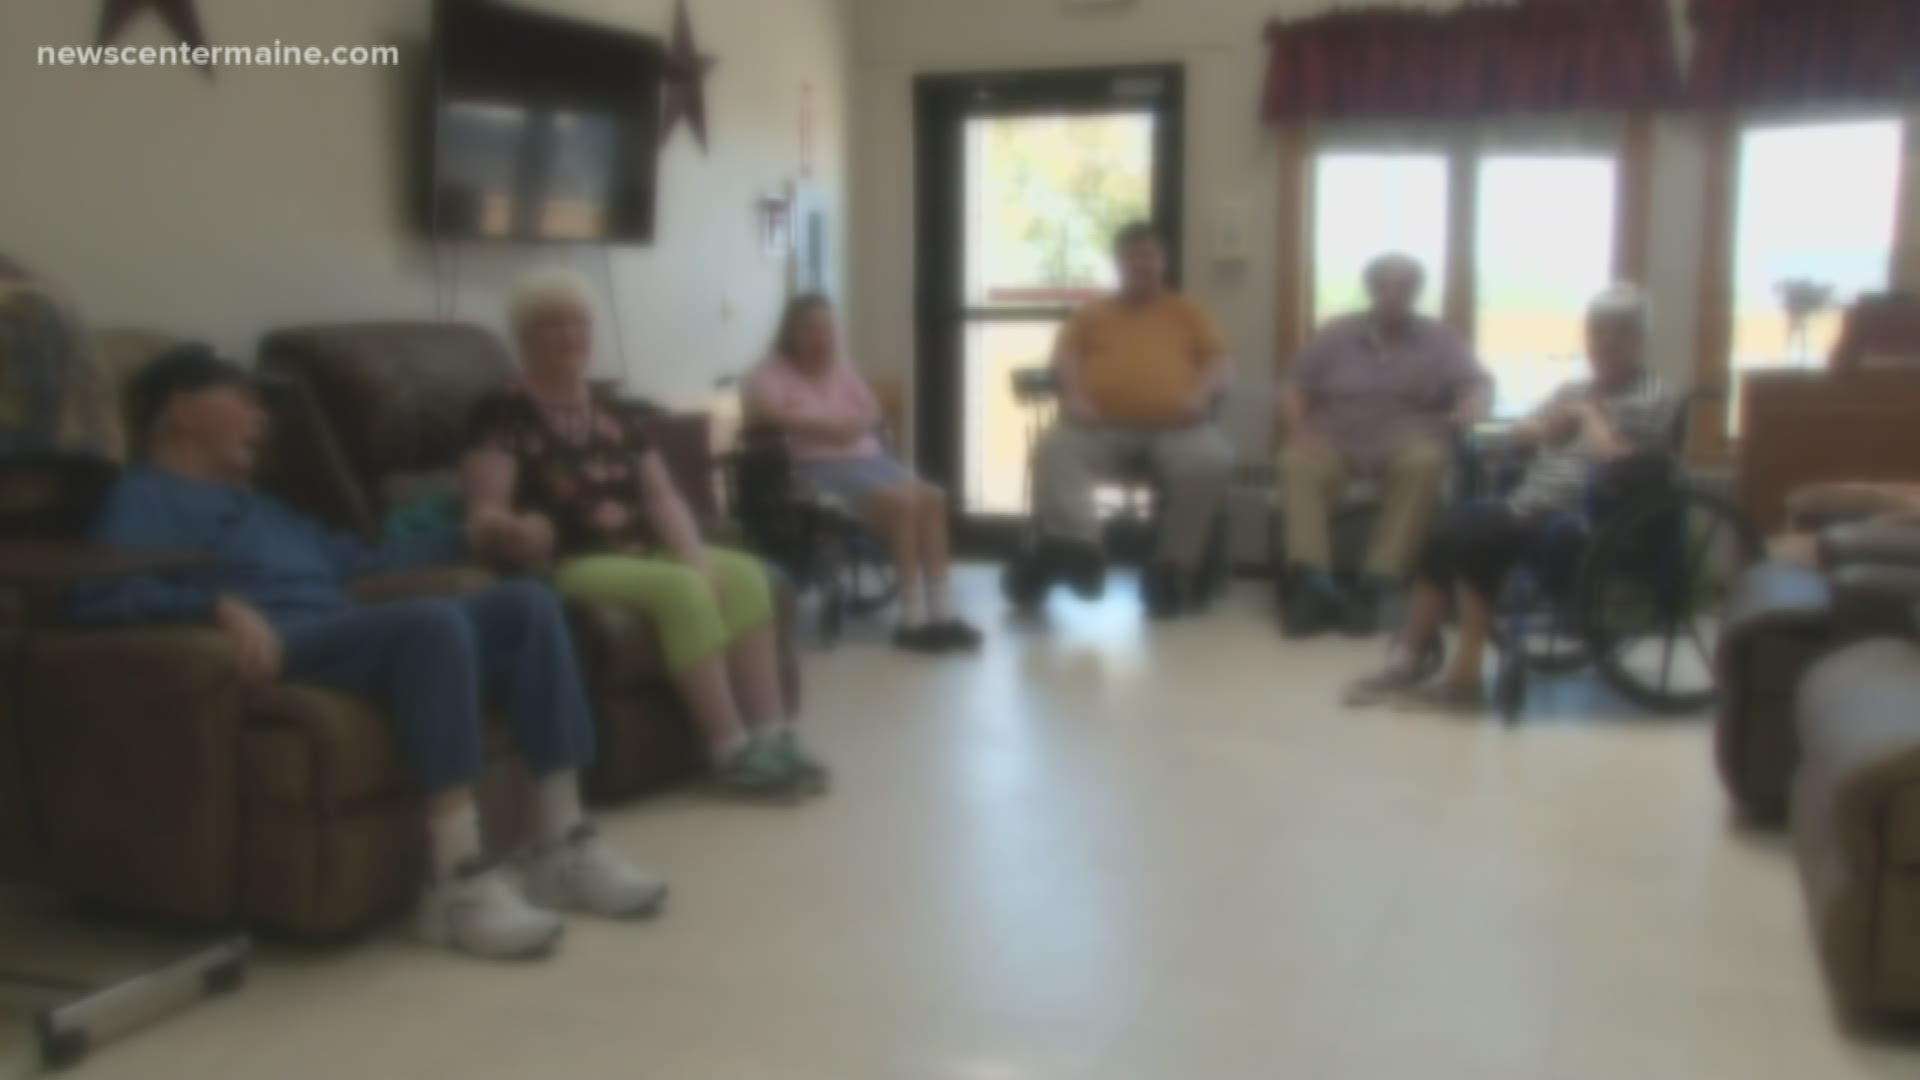 In-home care organization to close